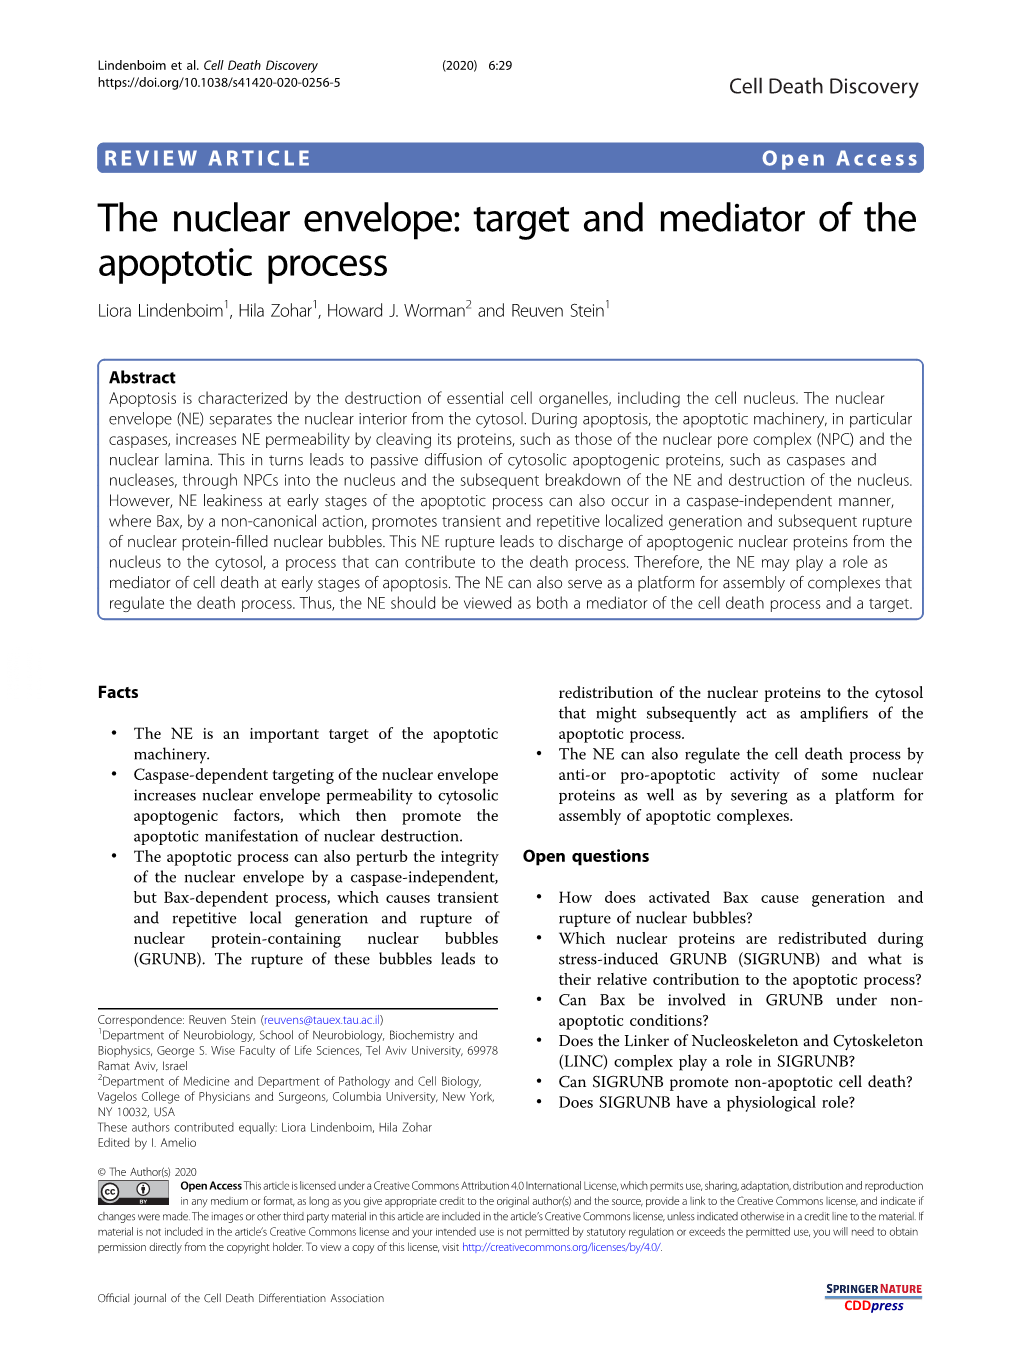 The Nuclear Envelope: Target and Mediator of the Apoptotic Process Liora Lindenboim1, Hila Zohar1,Howardj.Worman2 and Reuven Stein1